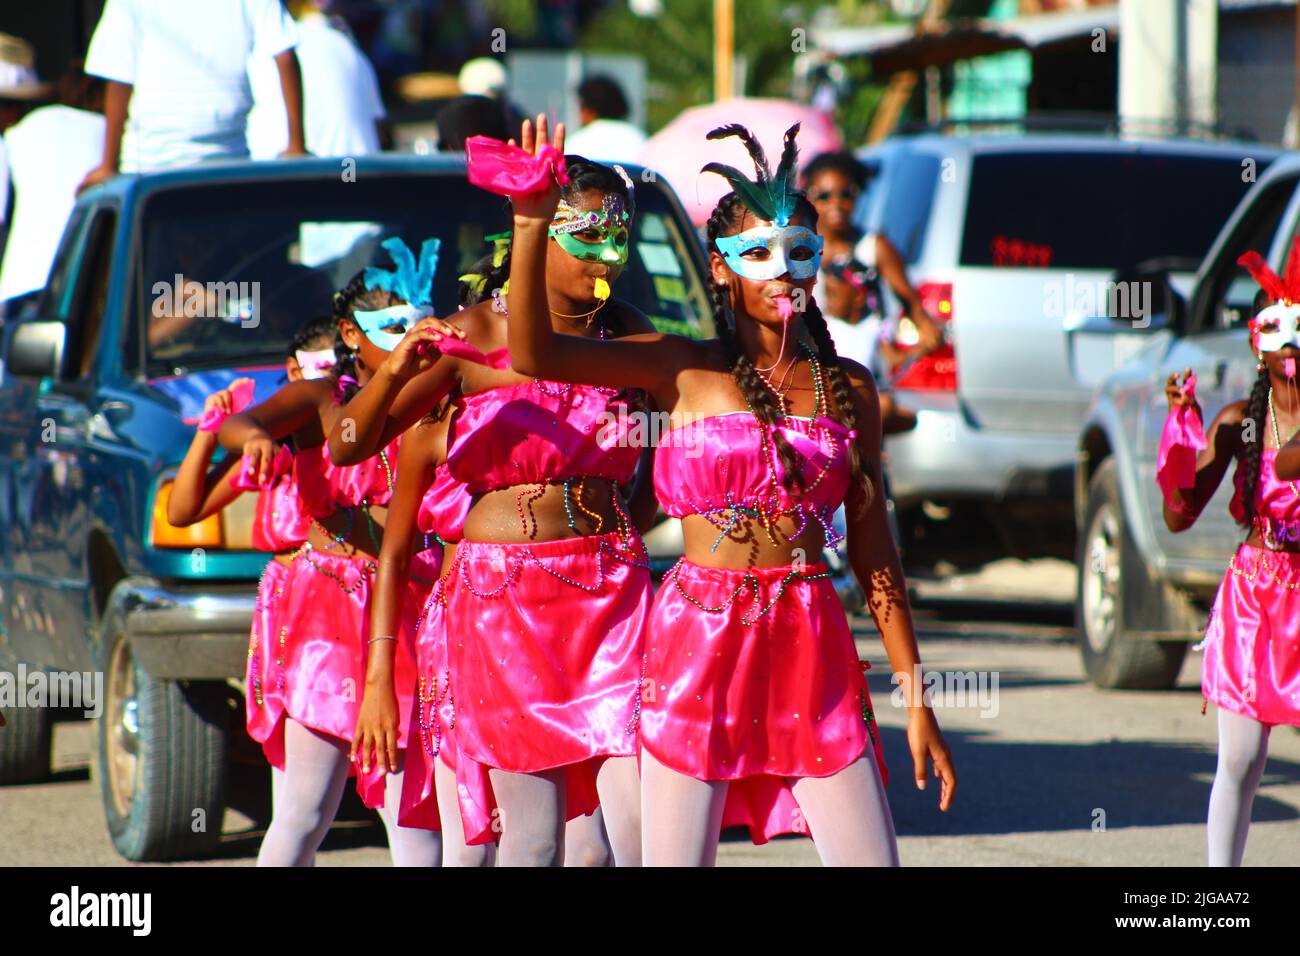 PUNTA GORDA, BELIZE - SEPTEMBER 10, 2016 St. George’s Caye Day celebrations and carnival line of girls in pink costumes with masks Stock Photo